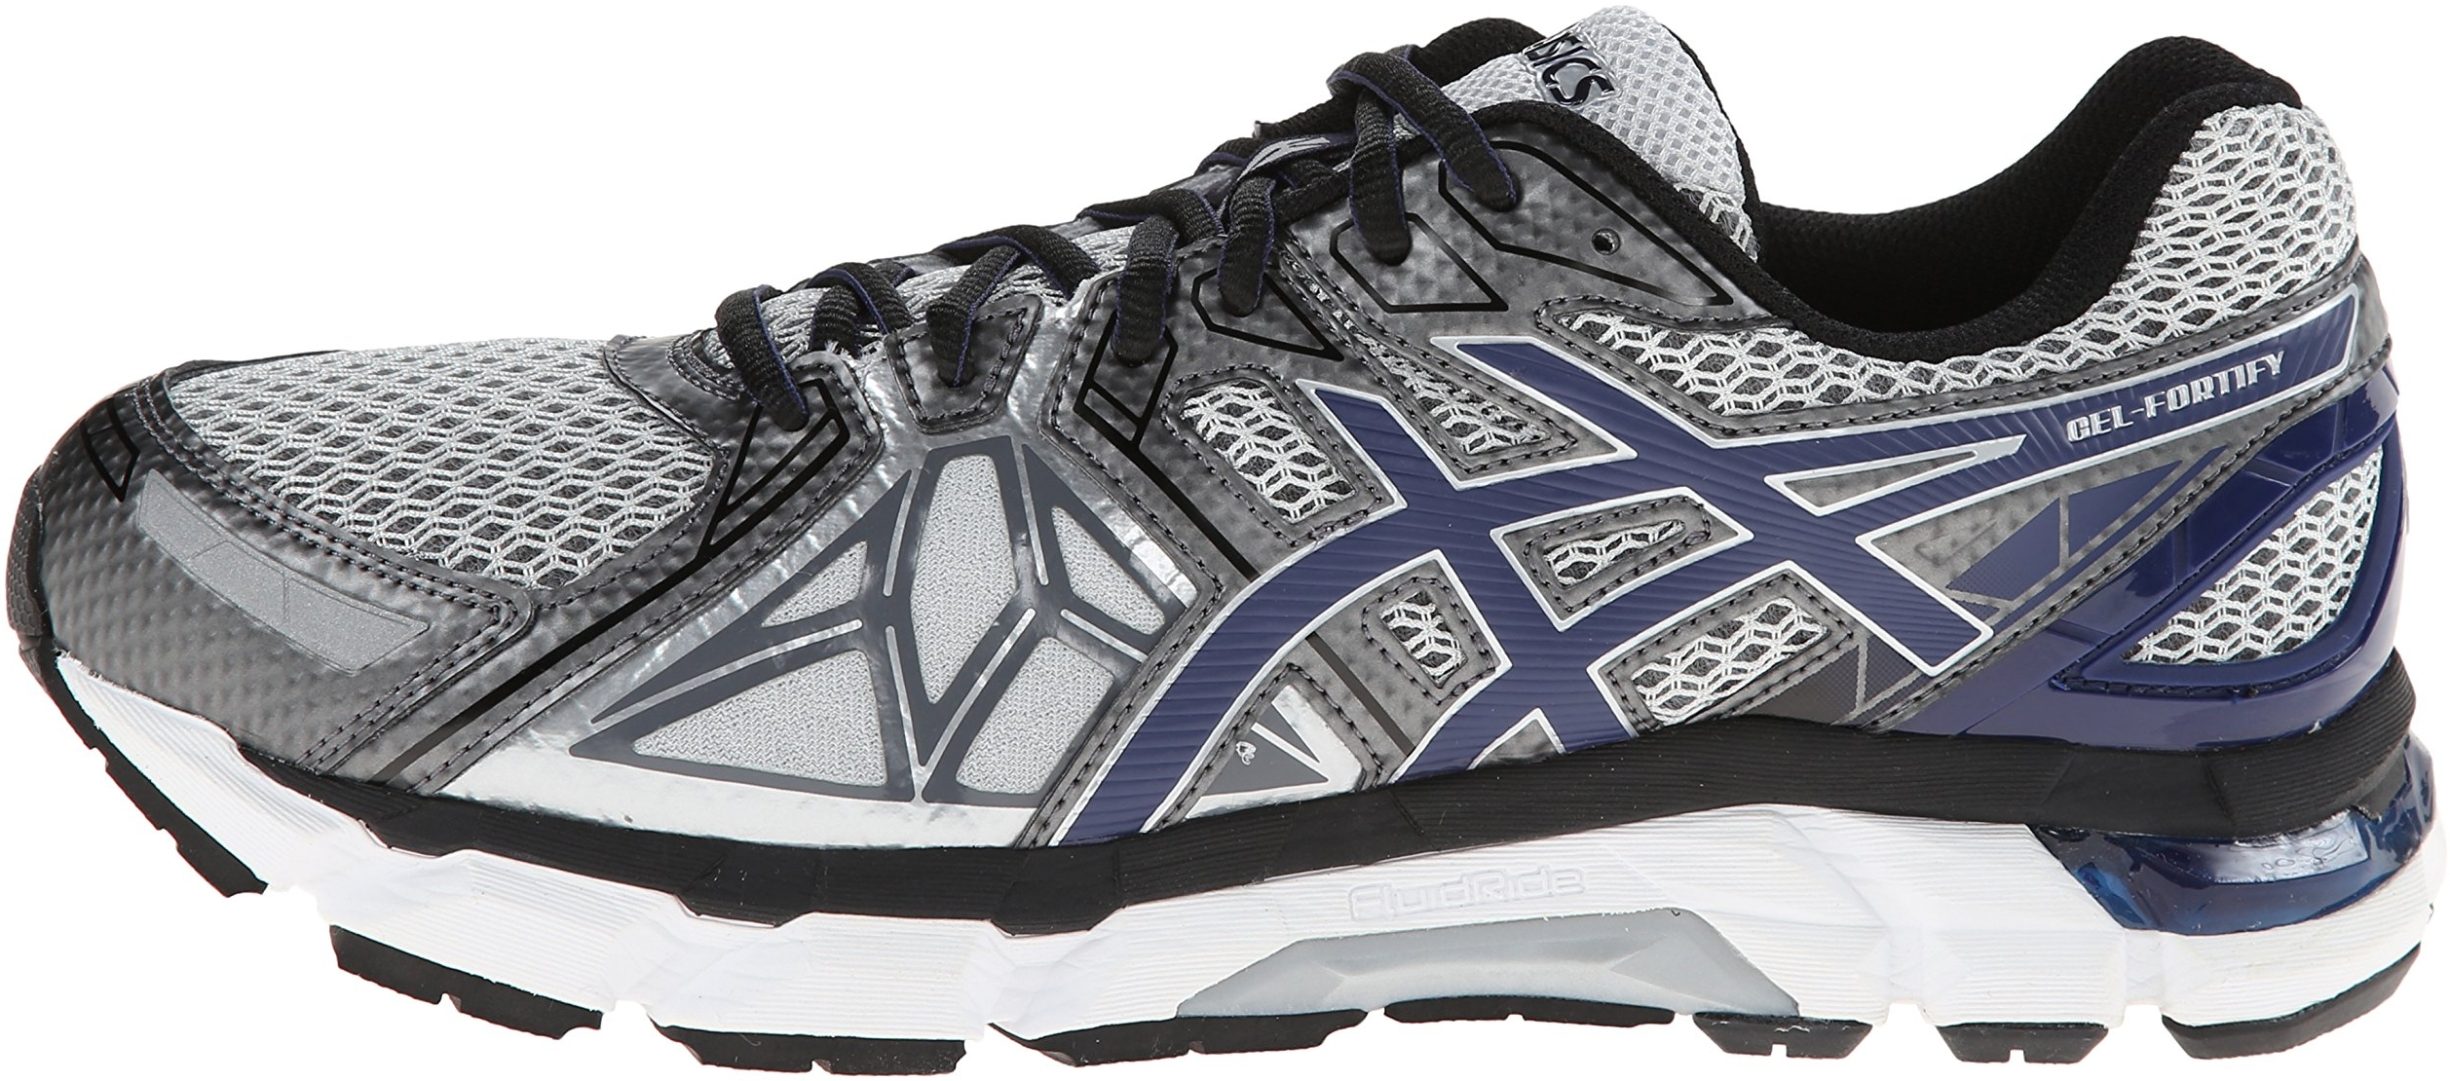 Asics motion control running shoes (3 